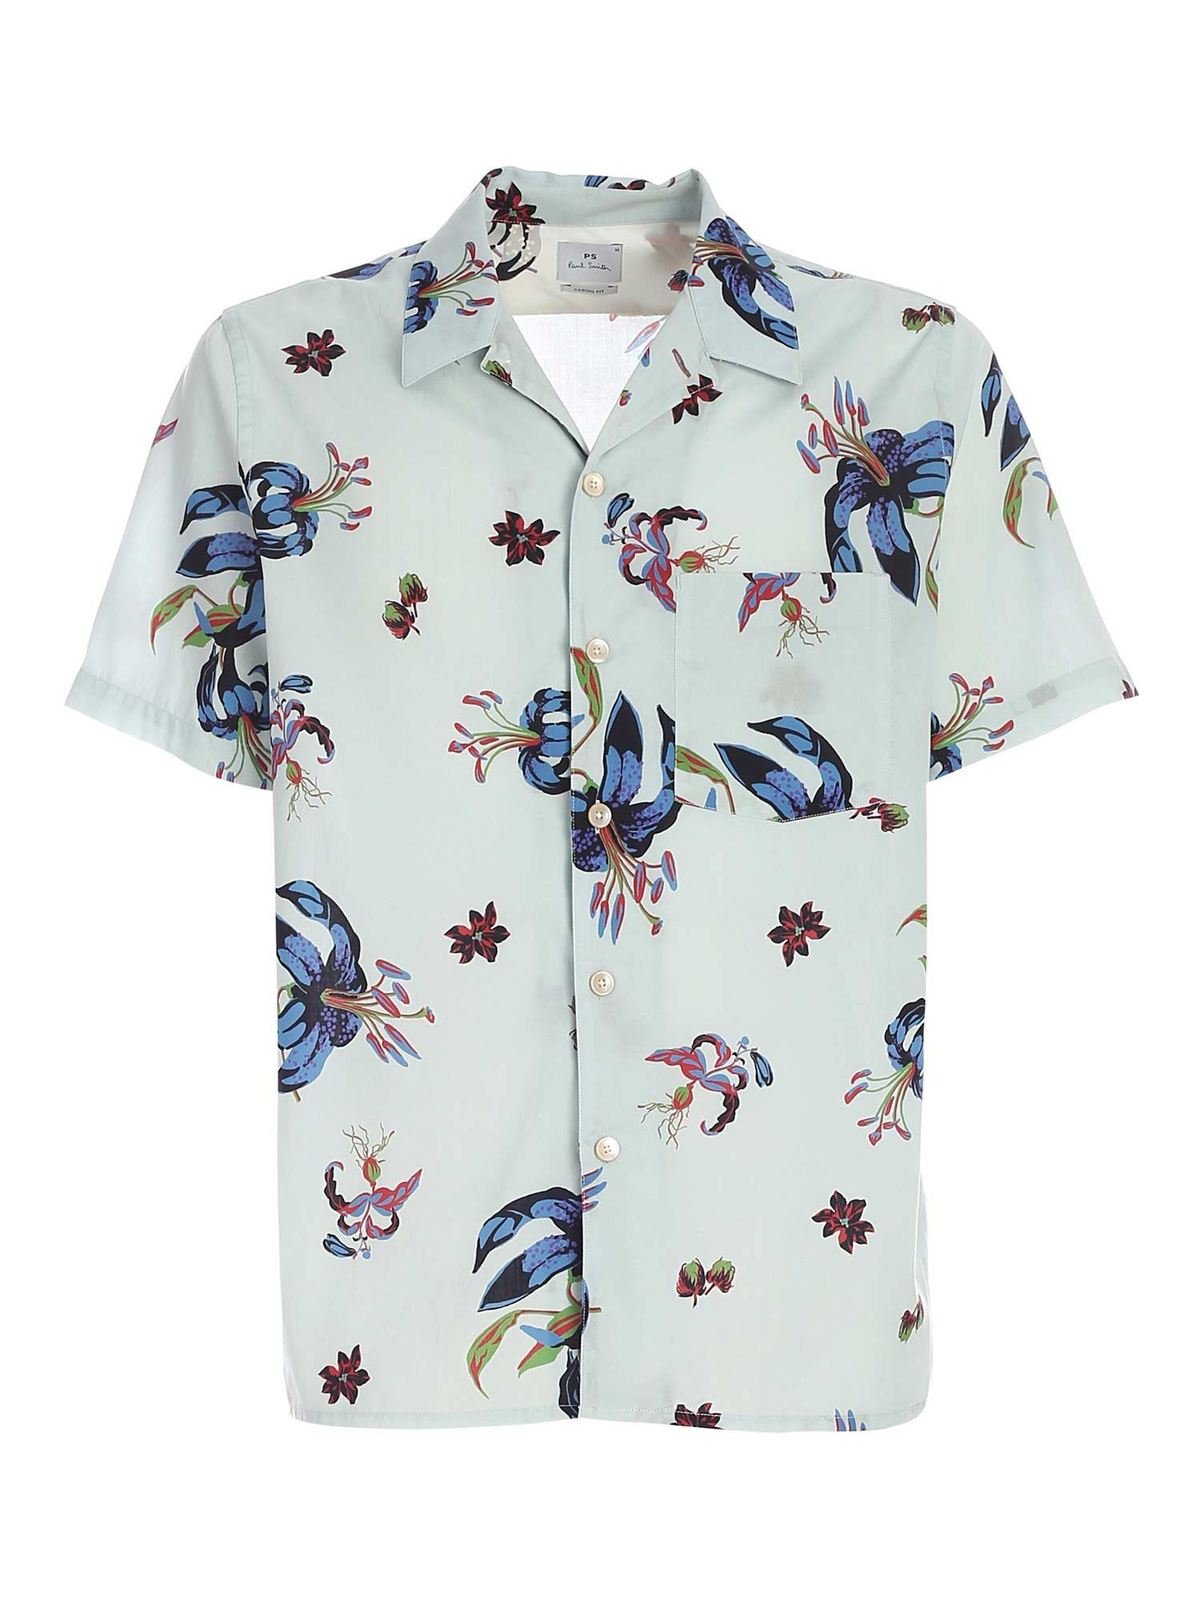 Paul Smith FLORAL PRINT SHIRT IN LIGHT BLUE